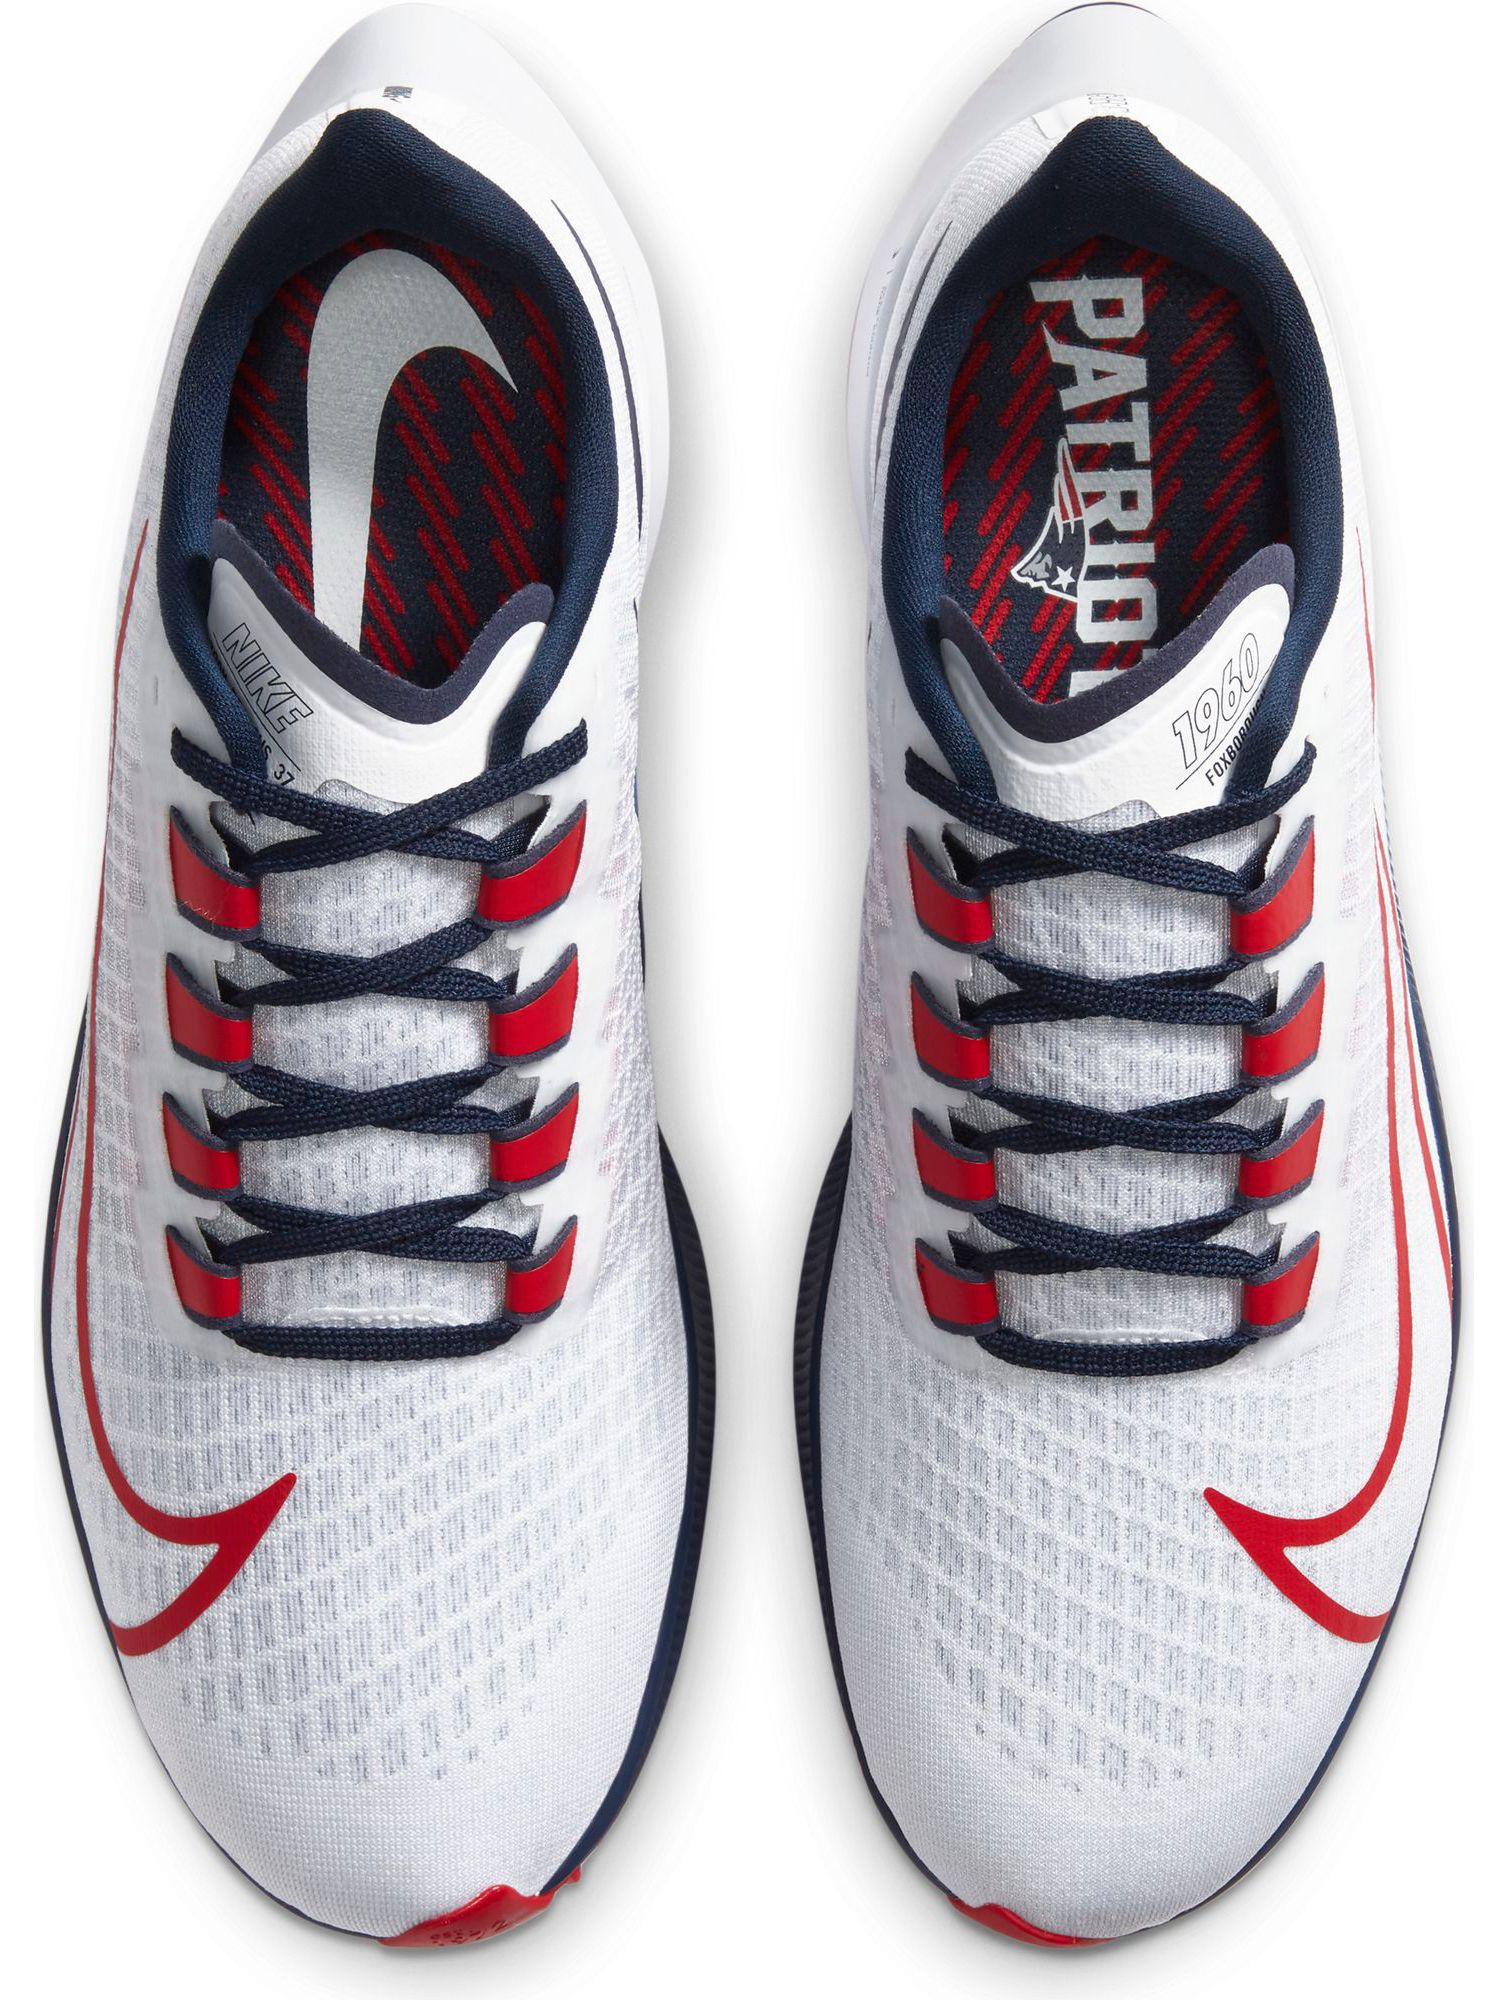 Nike releases new Patriots sneaker 